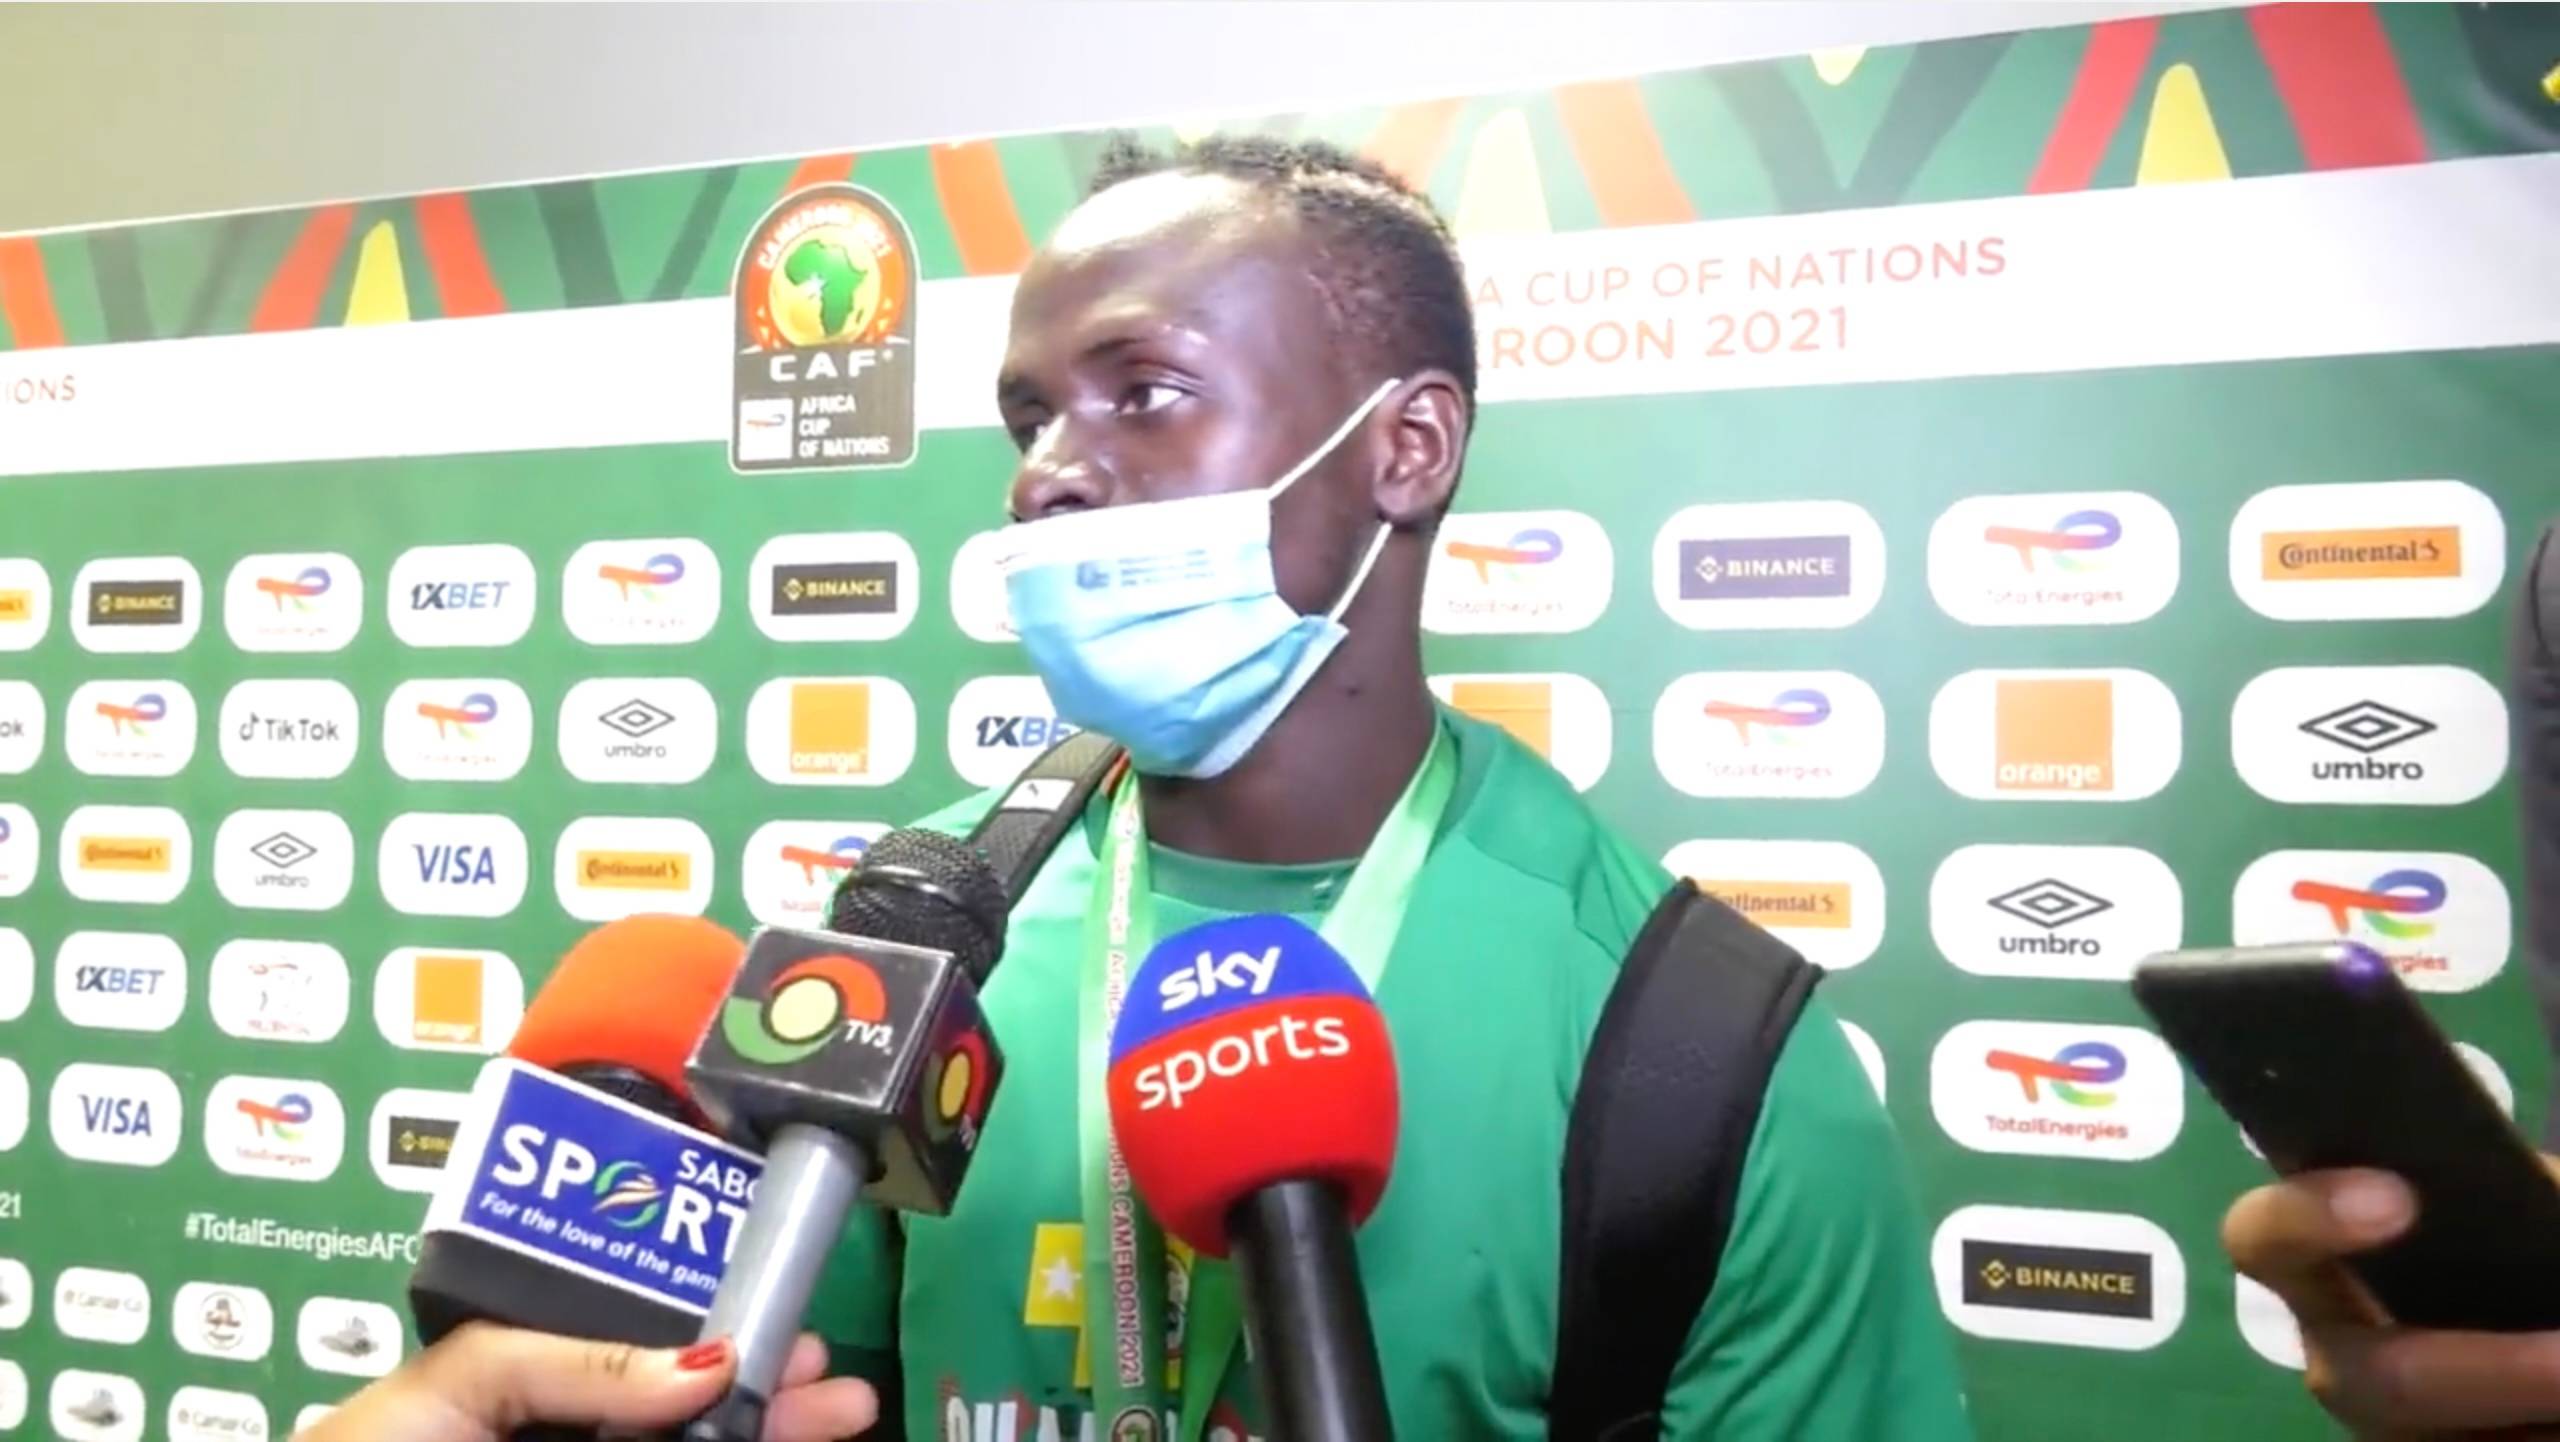 Sadio Mane’s interview after winning AFCON title with Senegal was superb